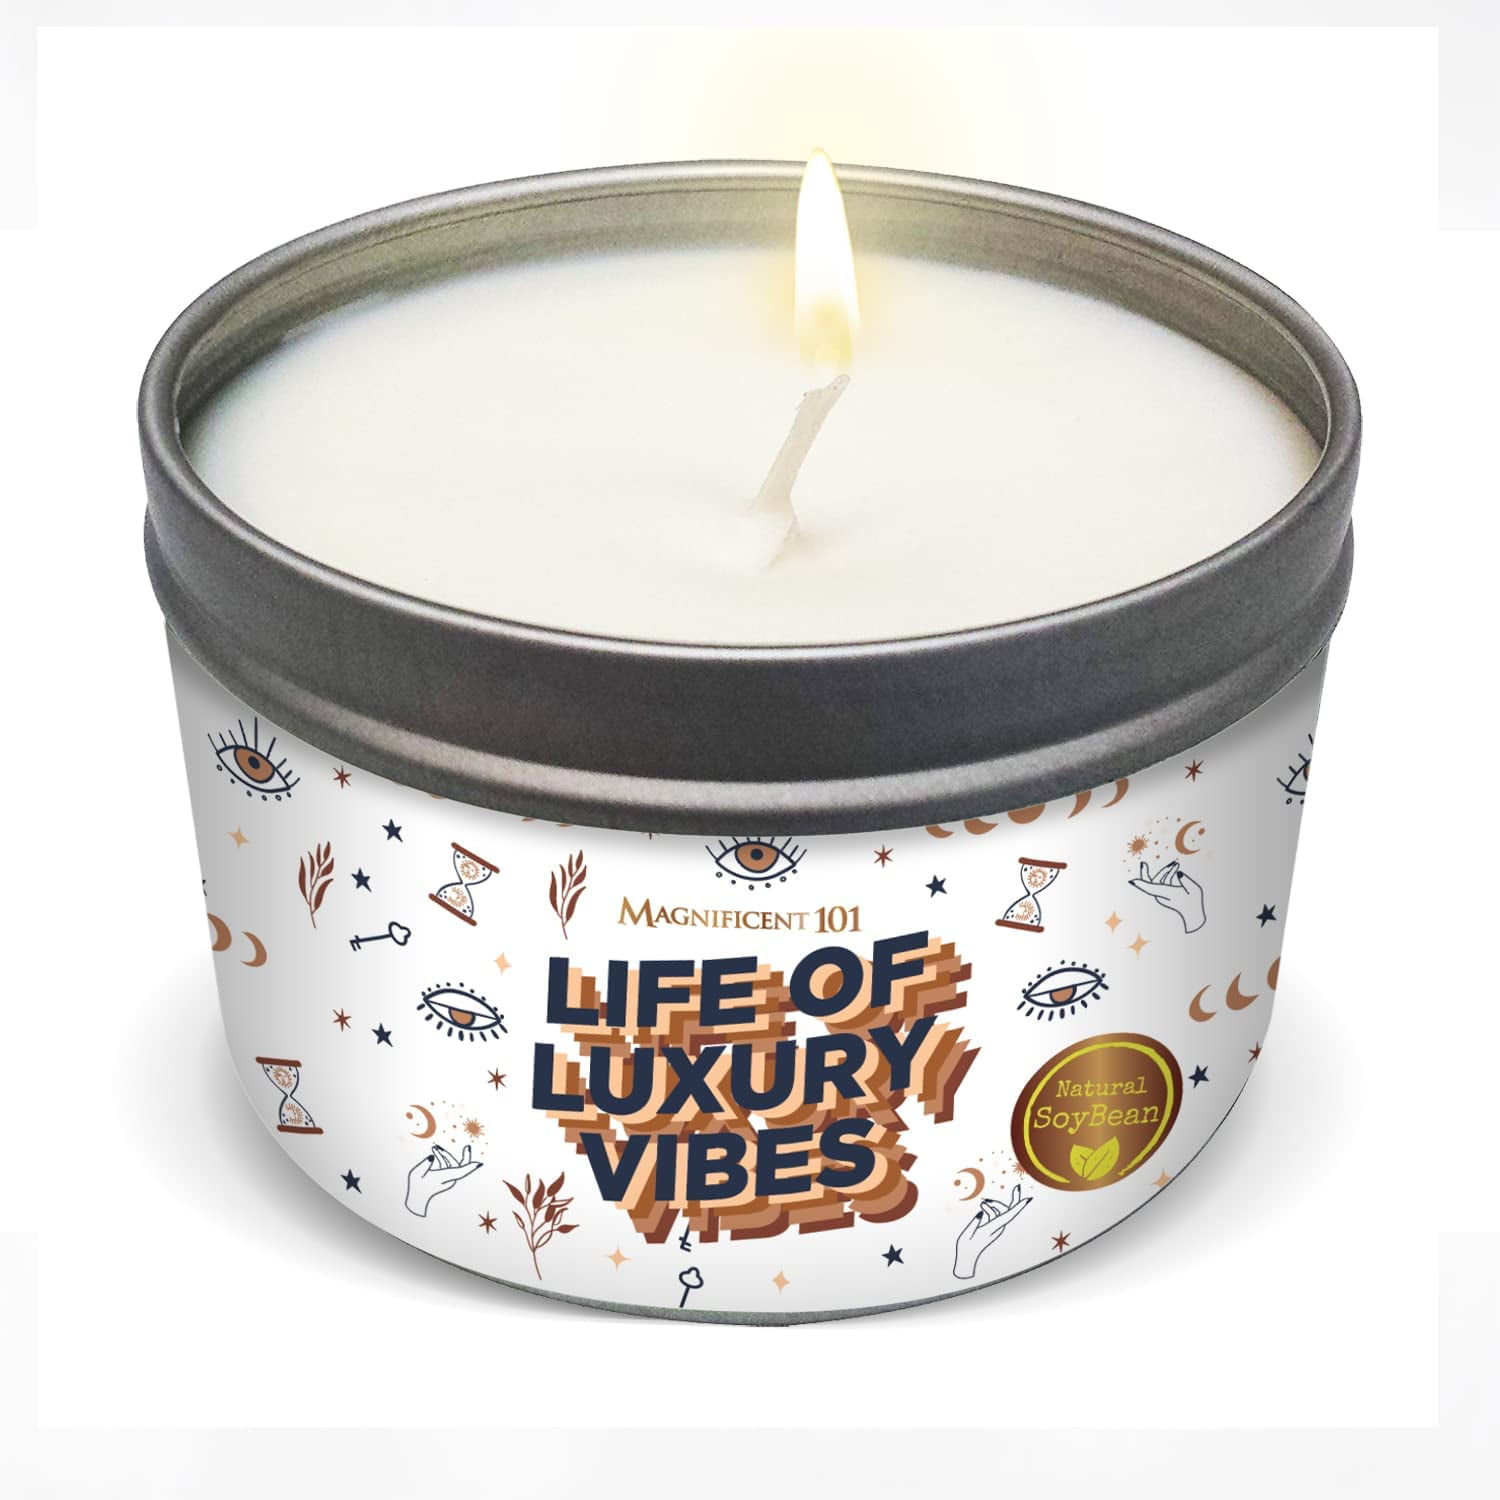 Magnificent 101 Spiritual Wealth Clove Vibes Aromatherapy Essential & Oils Tin Wax with Sage 6-oz. Soy Holder Candle in for